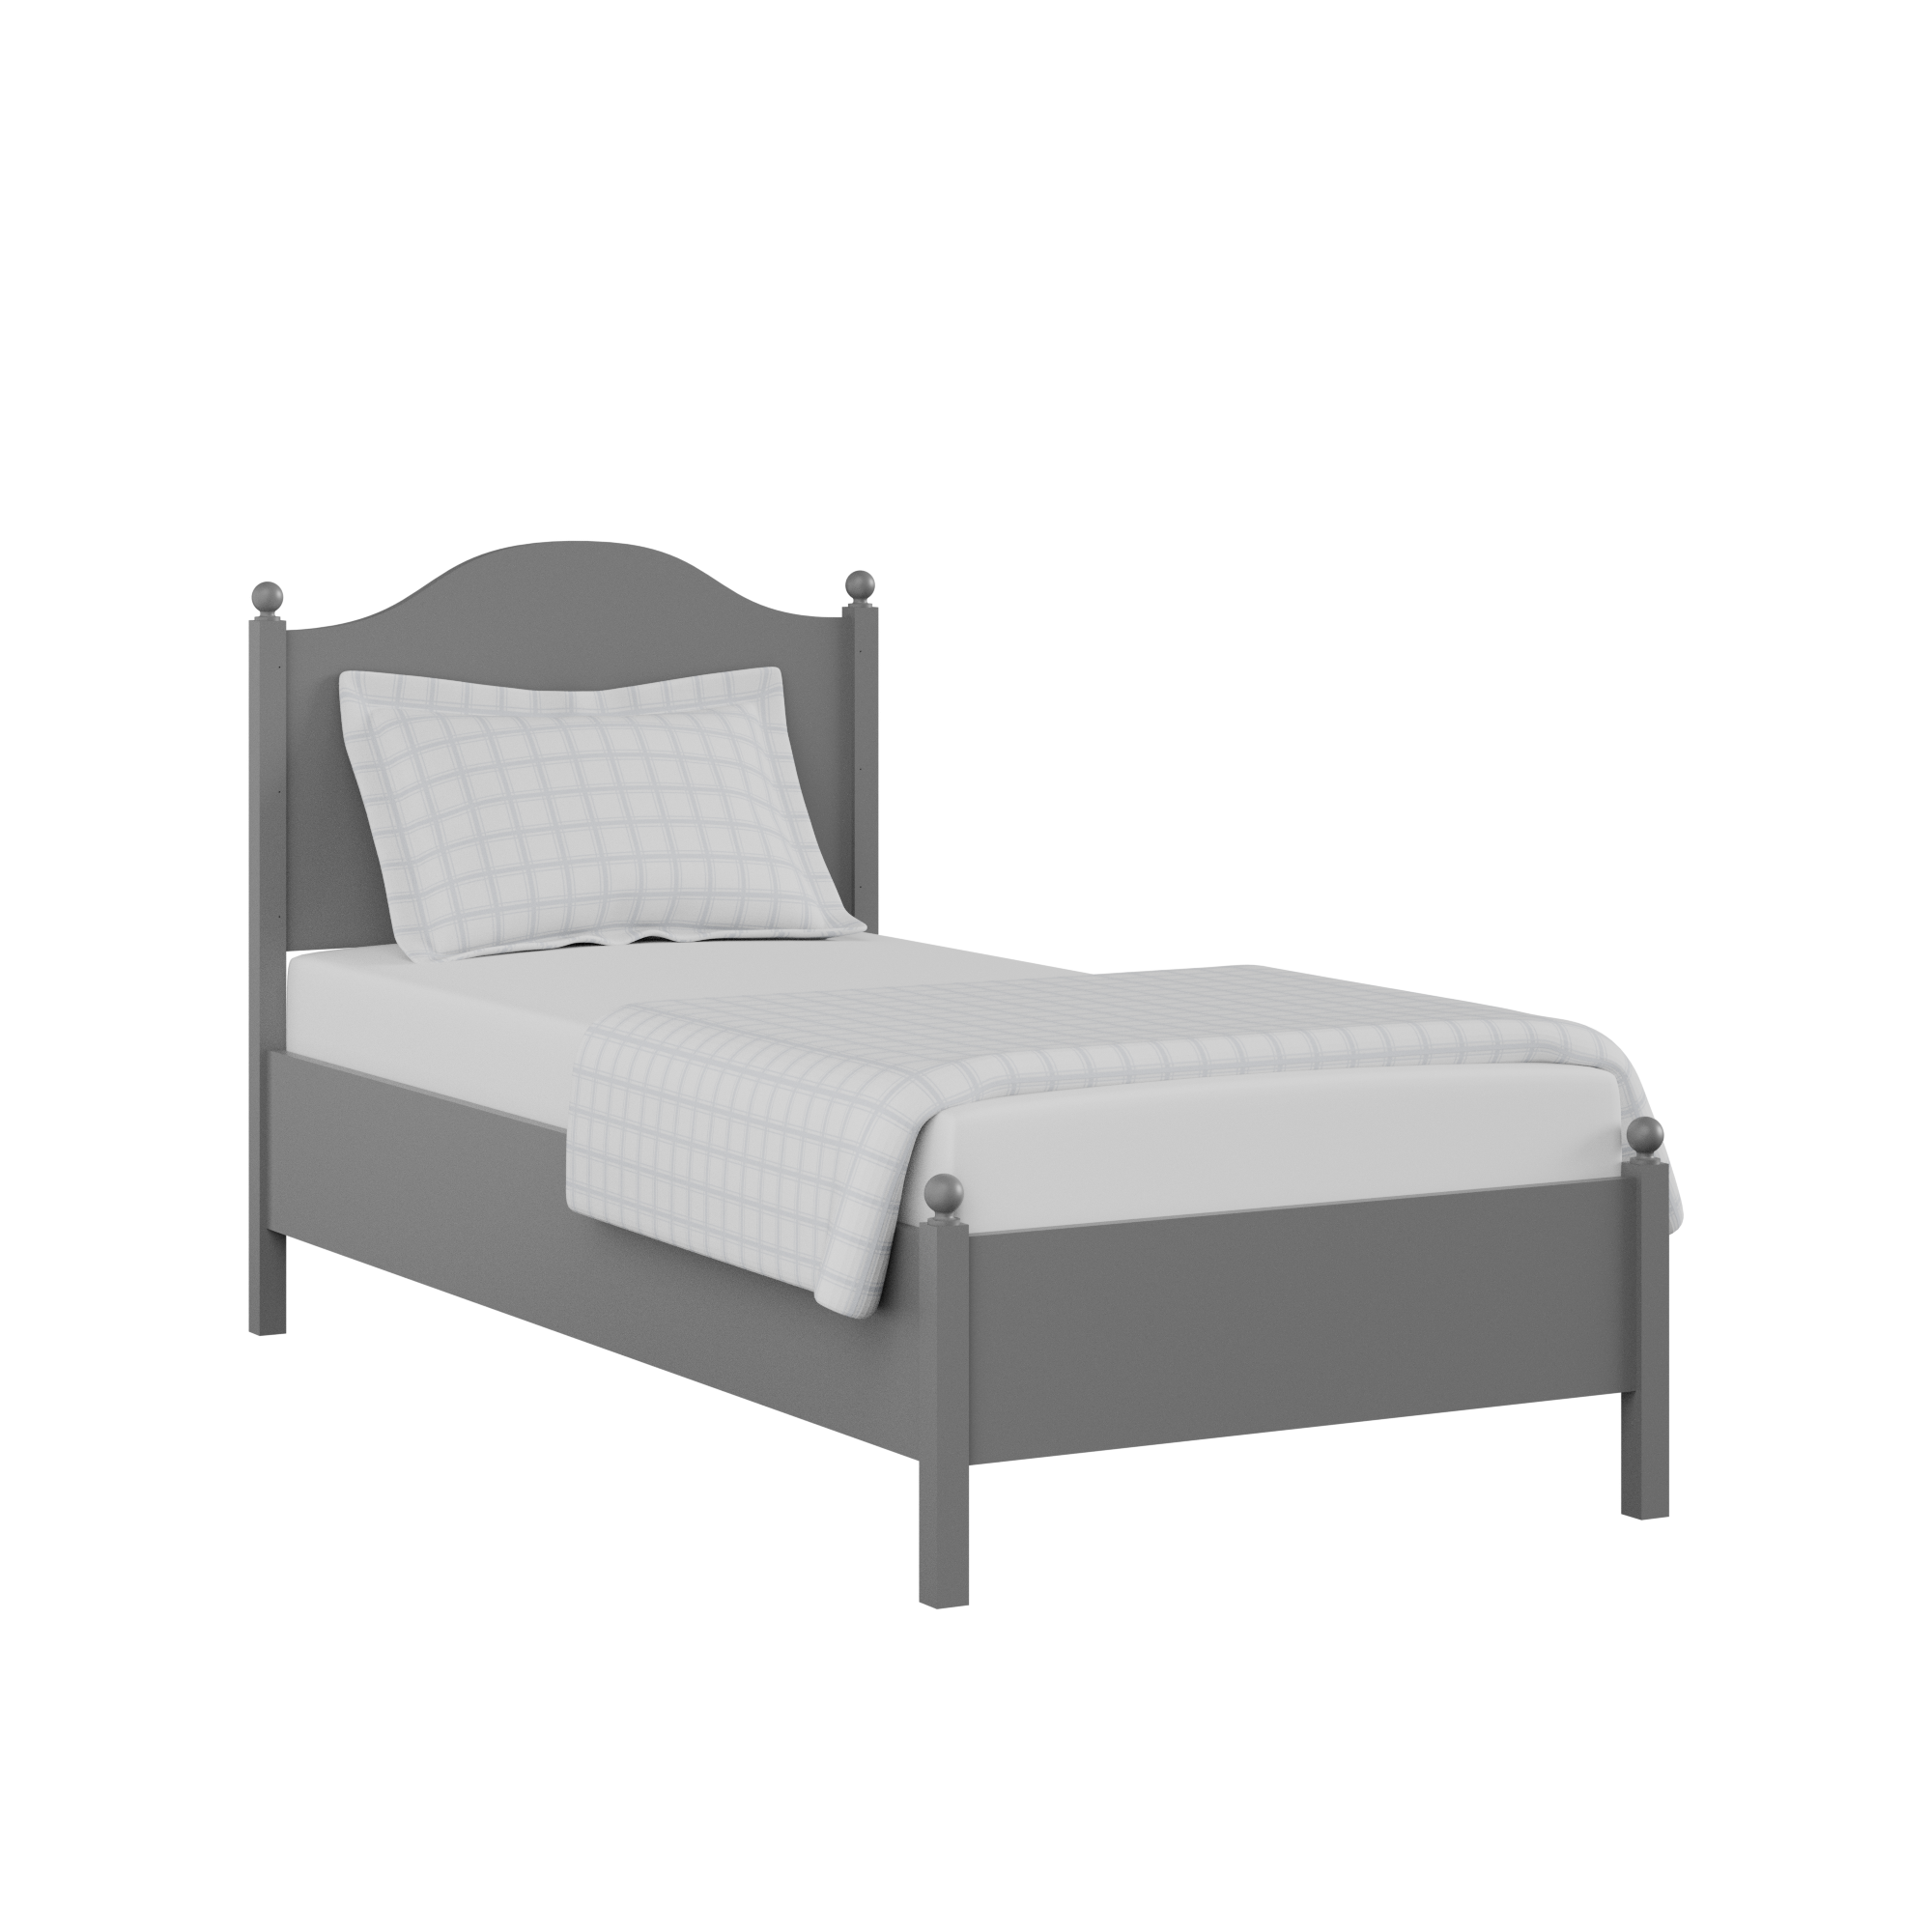 Brady Painted single painted wood bed in grey with Juno mattress